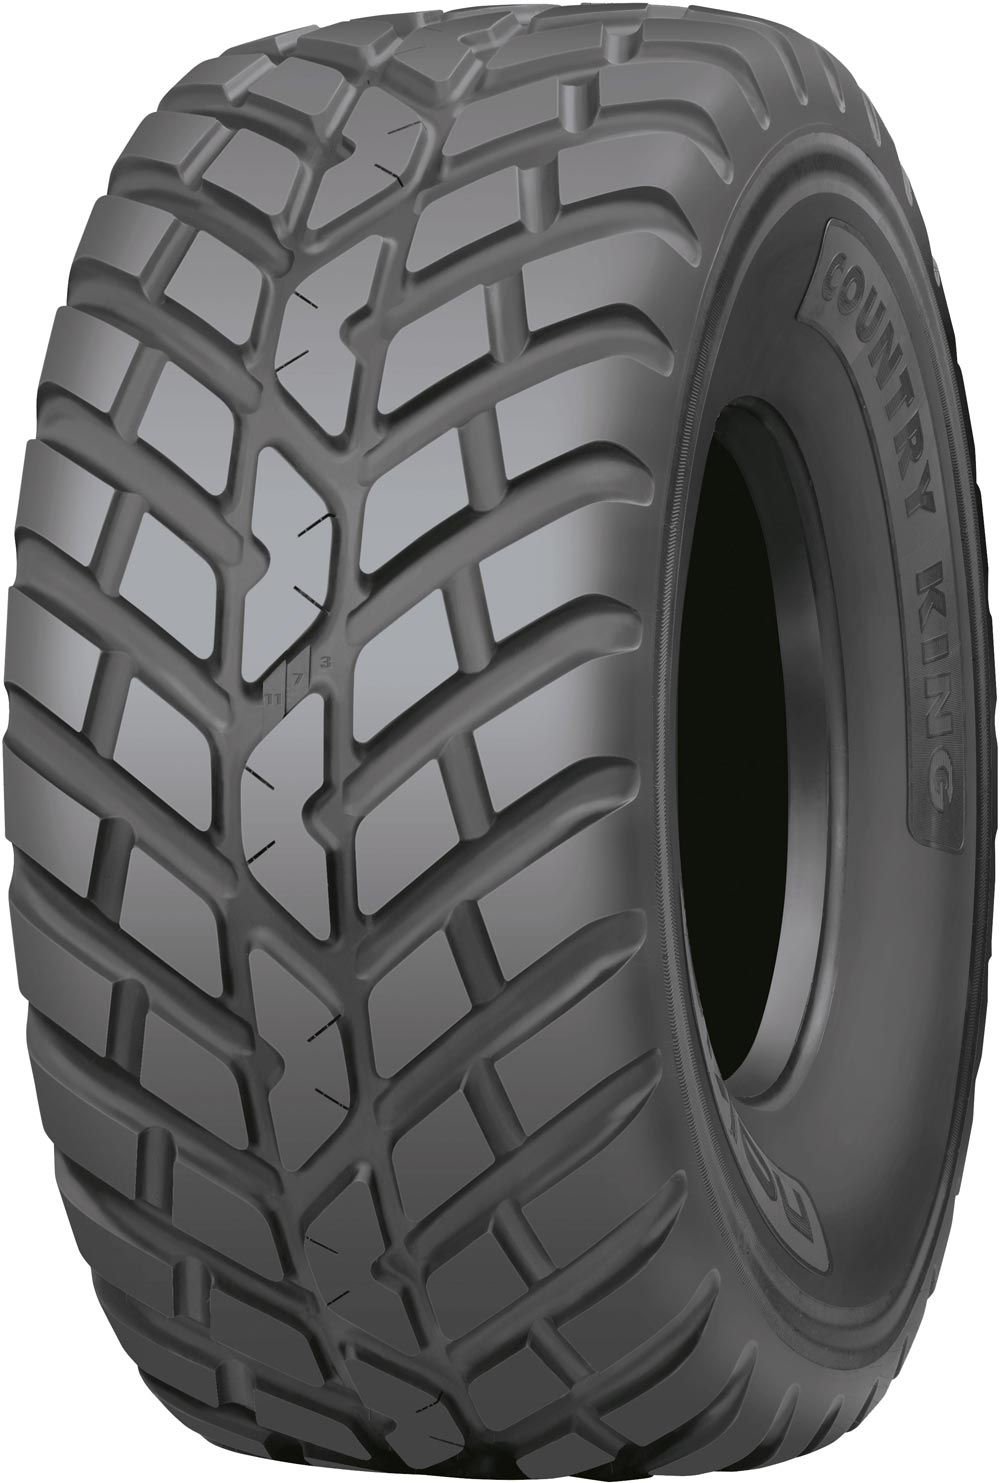 Индустриални гуми NOKIAN COUNTRY KING TL 710/50 R26.5 170D